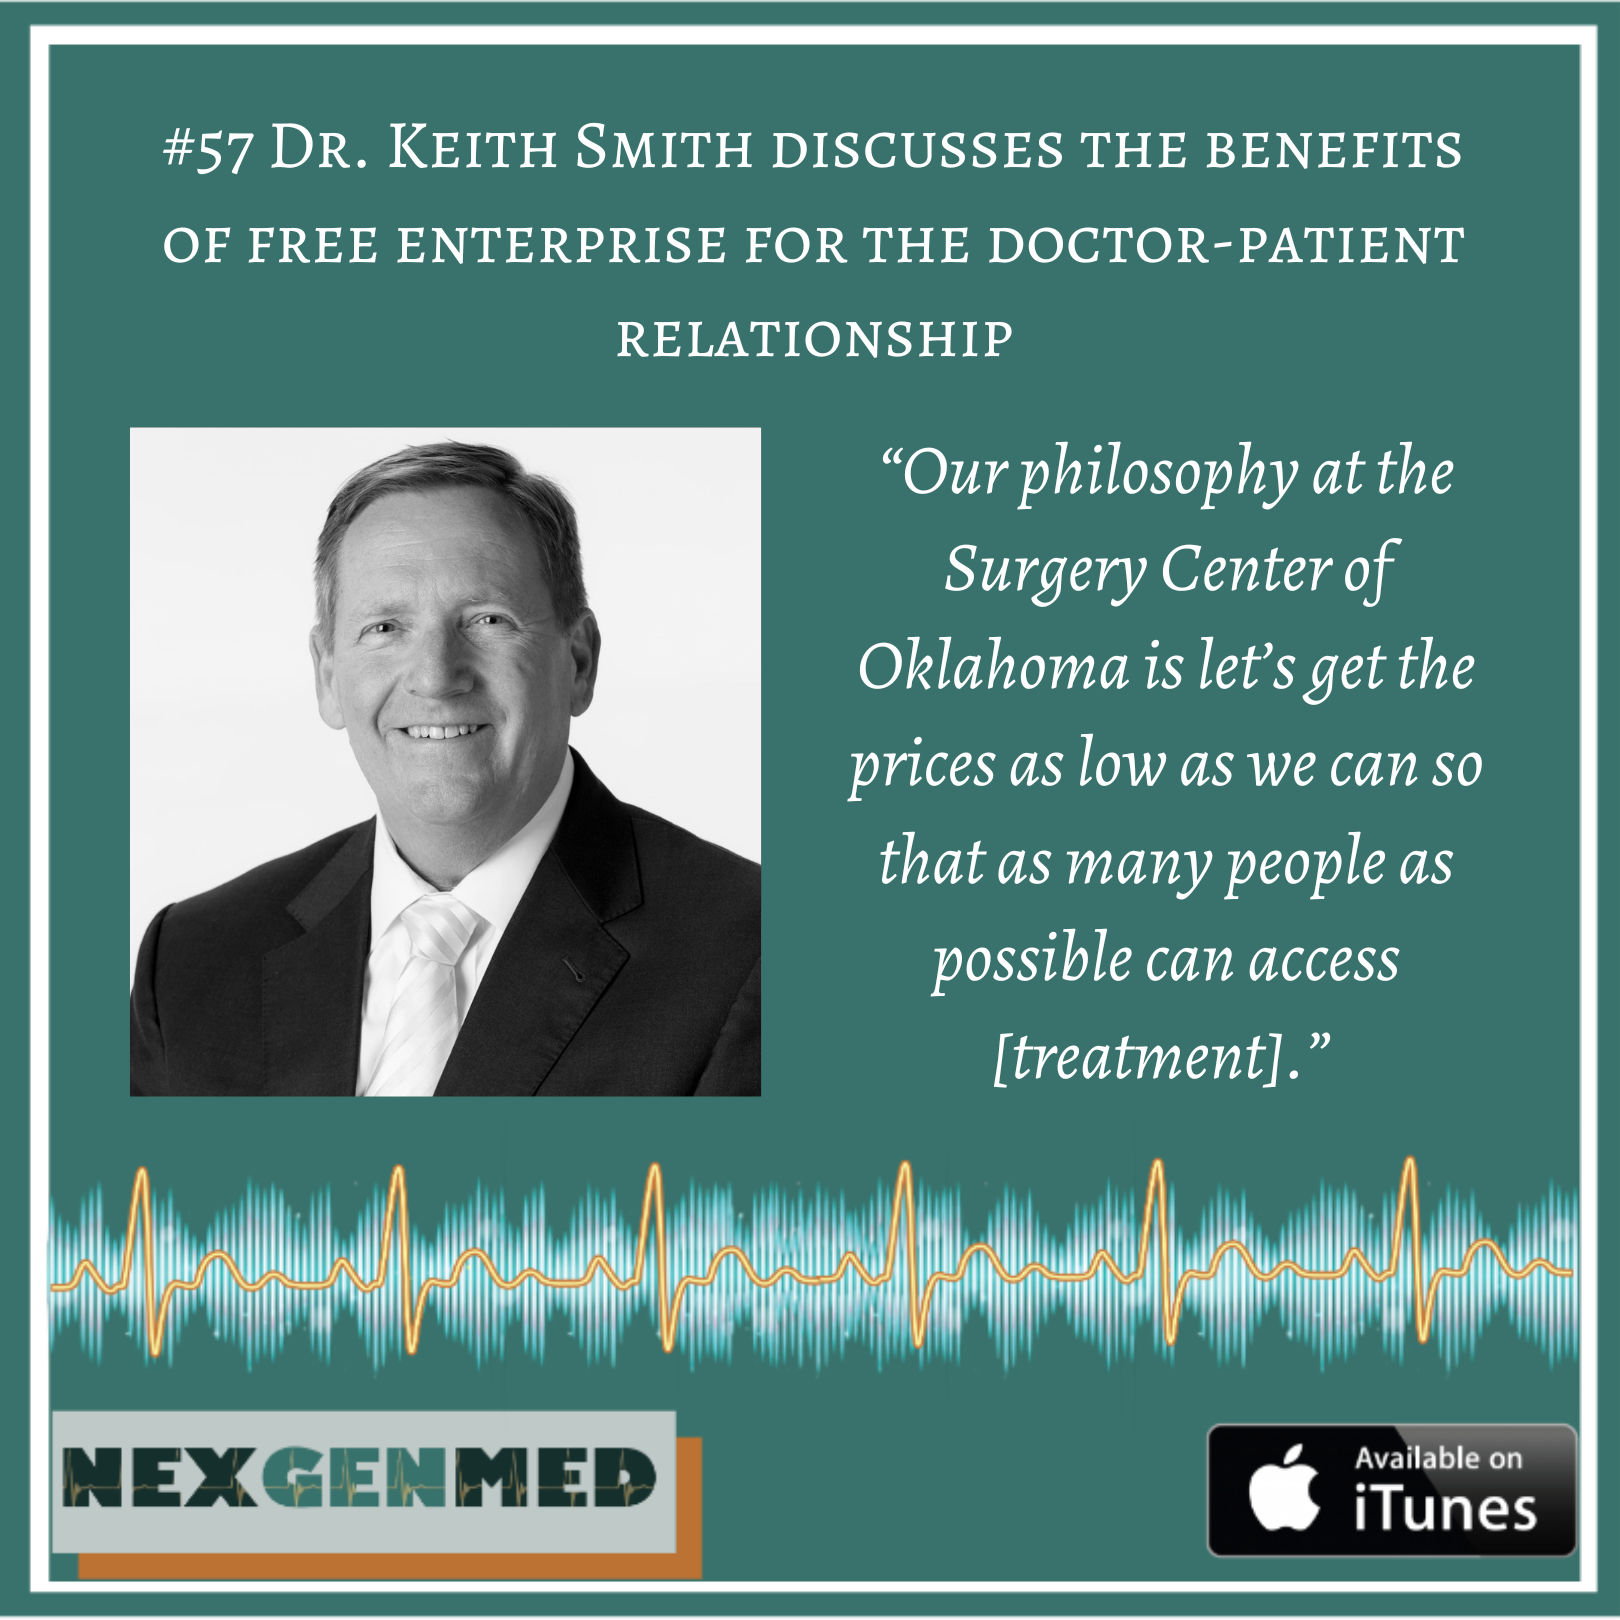 Dr. Keith Smith on the NexGenMed podcast from the Benjamin Rush Institute